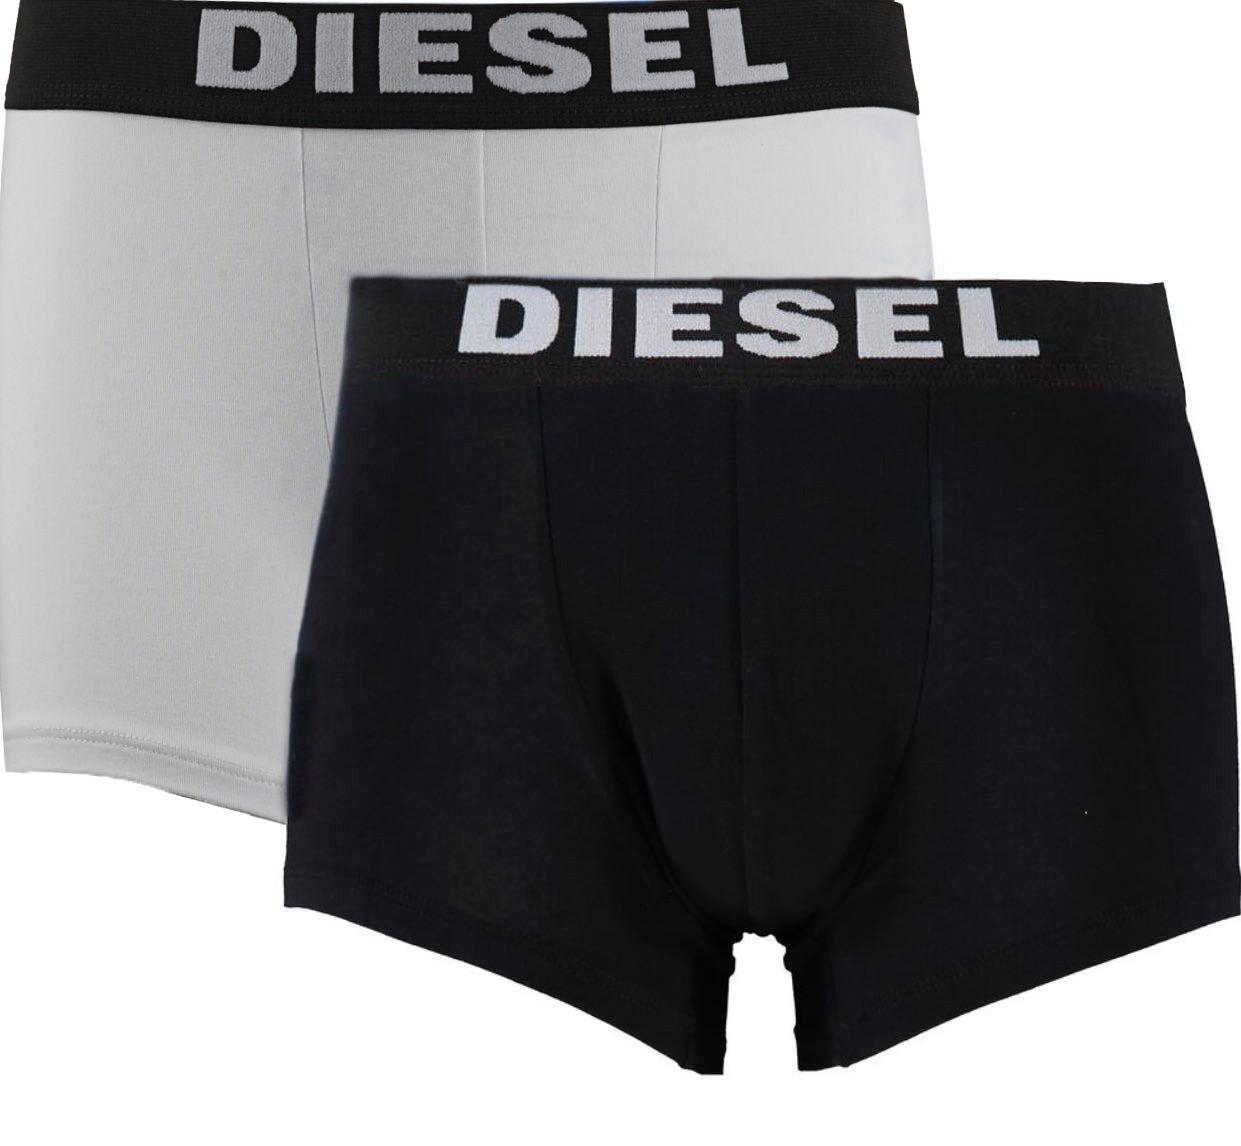 Diesel UMBX-ROCCO 23 Boxer Shorts Two Pack. Diesel Mens Boxer Shorts 2 Pack. 95% Cotton 5% Elastane. Stretching Fit. Diesel Branding on Waistband. Style - UMBX-KORYTWOPACK RQARZ E1350